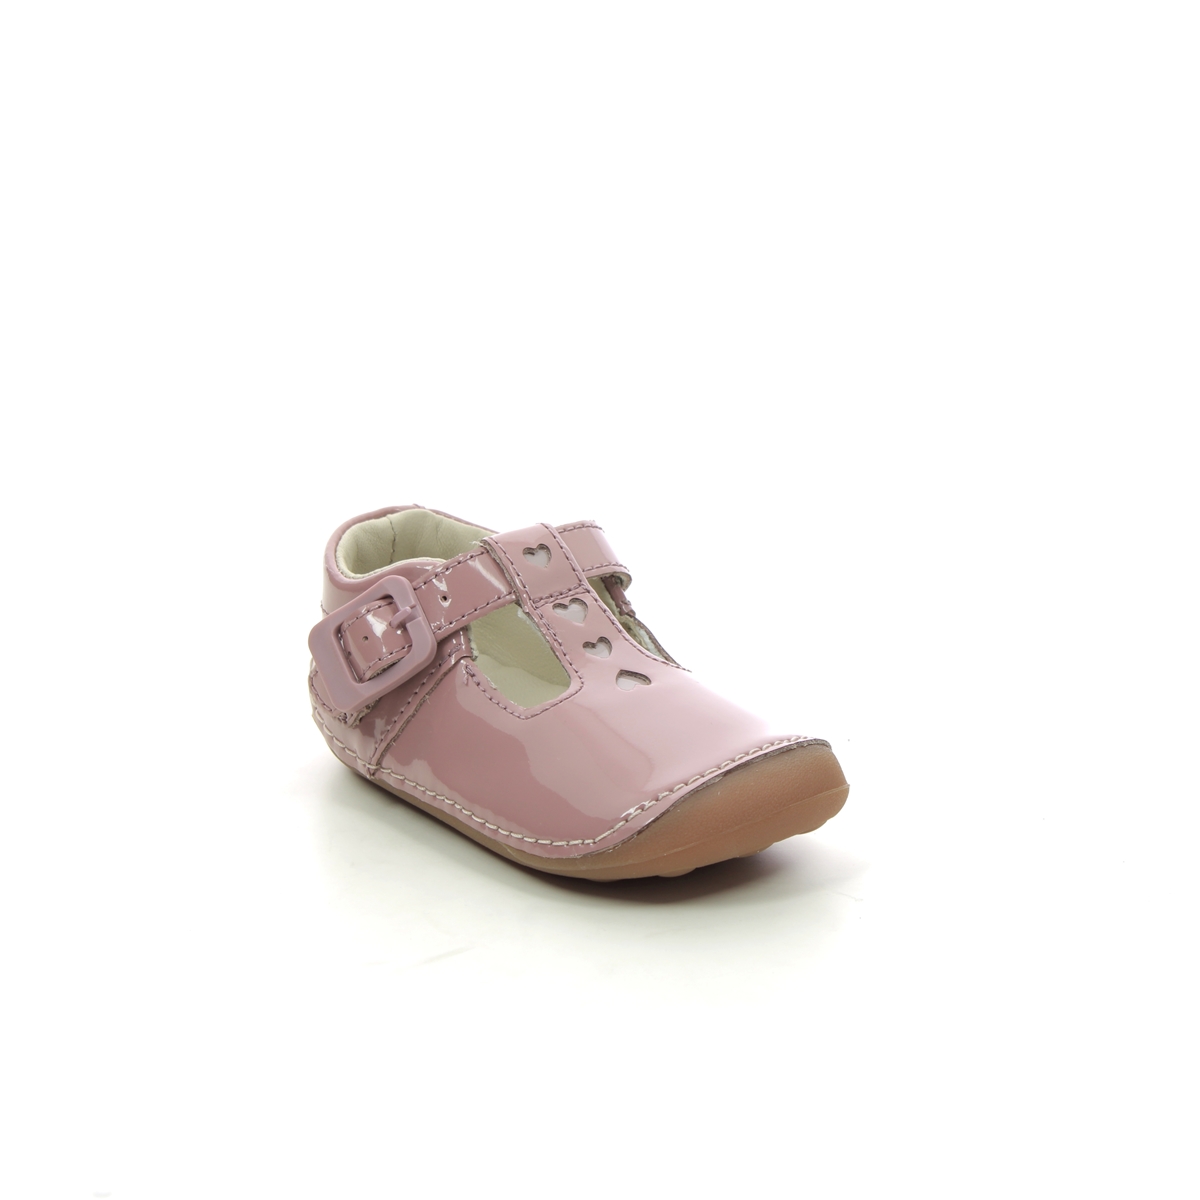 Clarks Tiny Beat T Pink Kids Girls First And Baby Shoes 694087G In Size 2 In Plain Pink G Width Fitting For kids